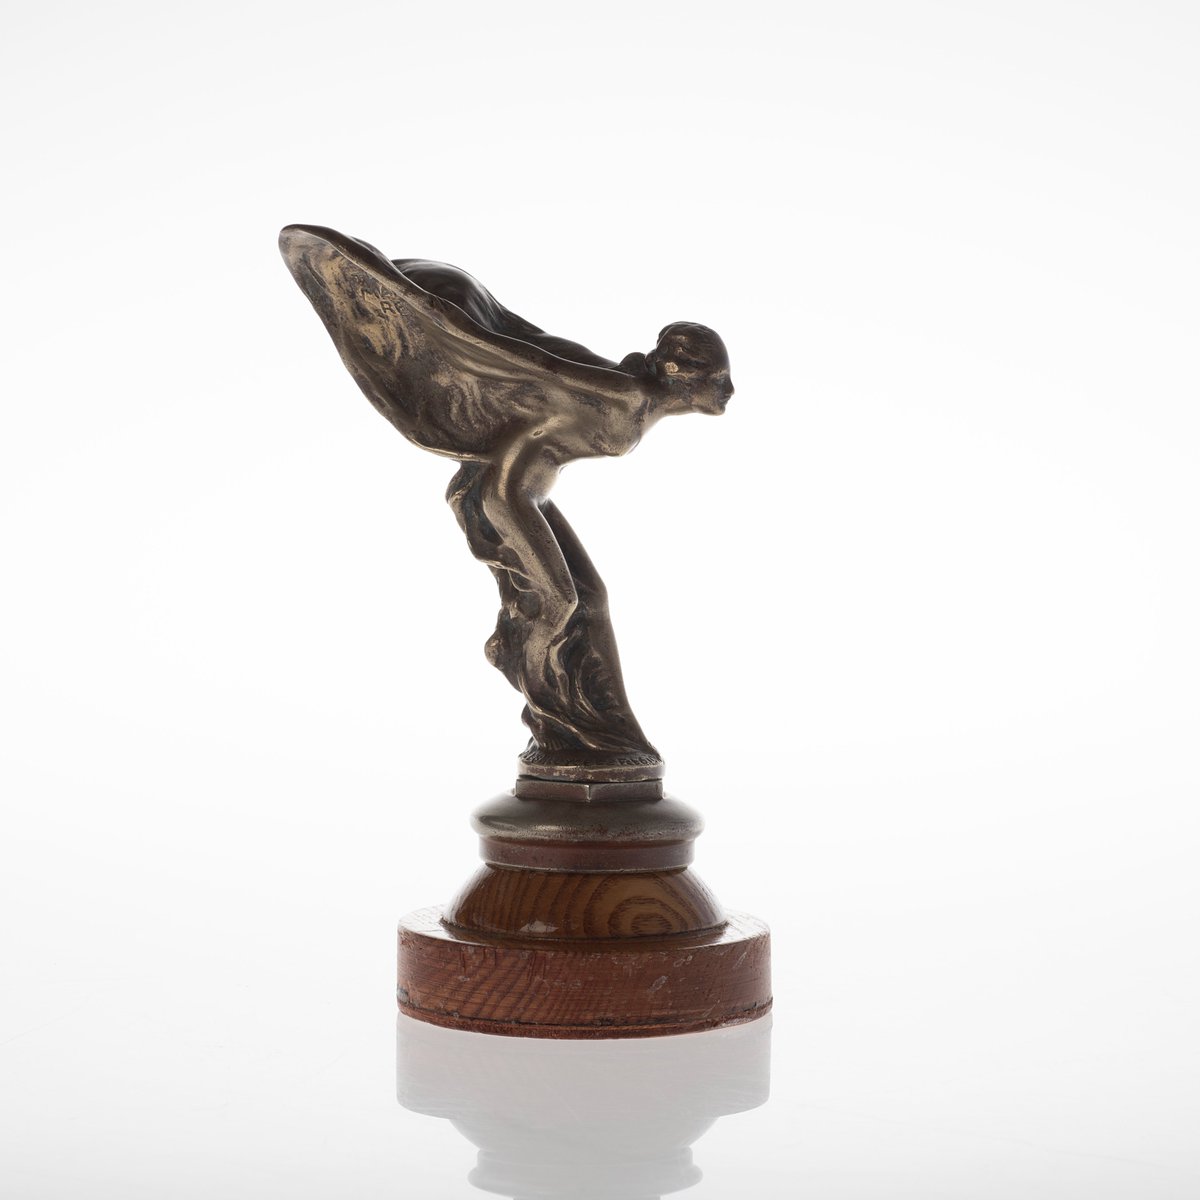 An interesting article in @dailyartmag about the tale of John, 2nd Lord Montagu, the sculptor Charles Robinson Sykes and The Spirit of Ecstasy: The Story Behind the Rolls-Royce Ornament - dailyartmagazine.com/story-of-the-s…